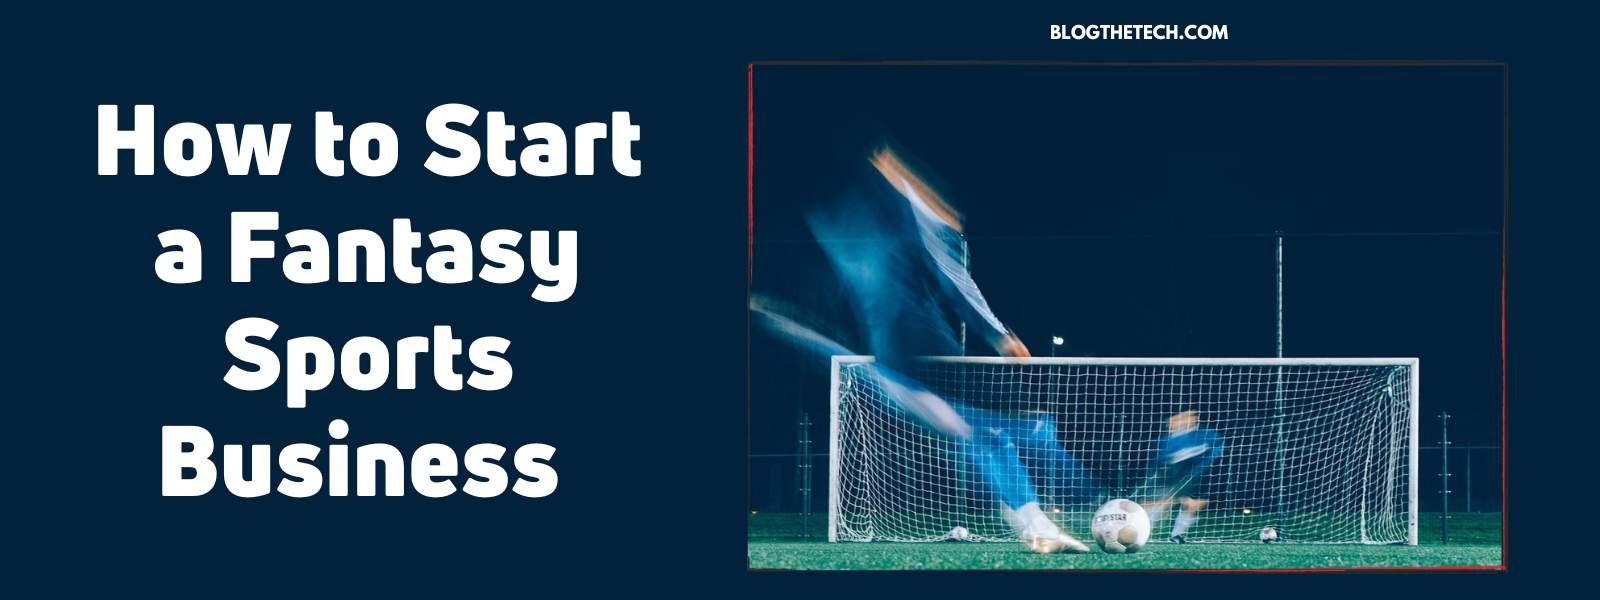 how-to-start-a-fantasy-sports-business-featured